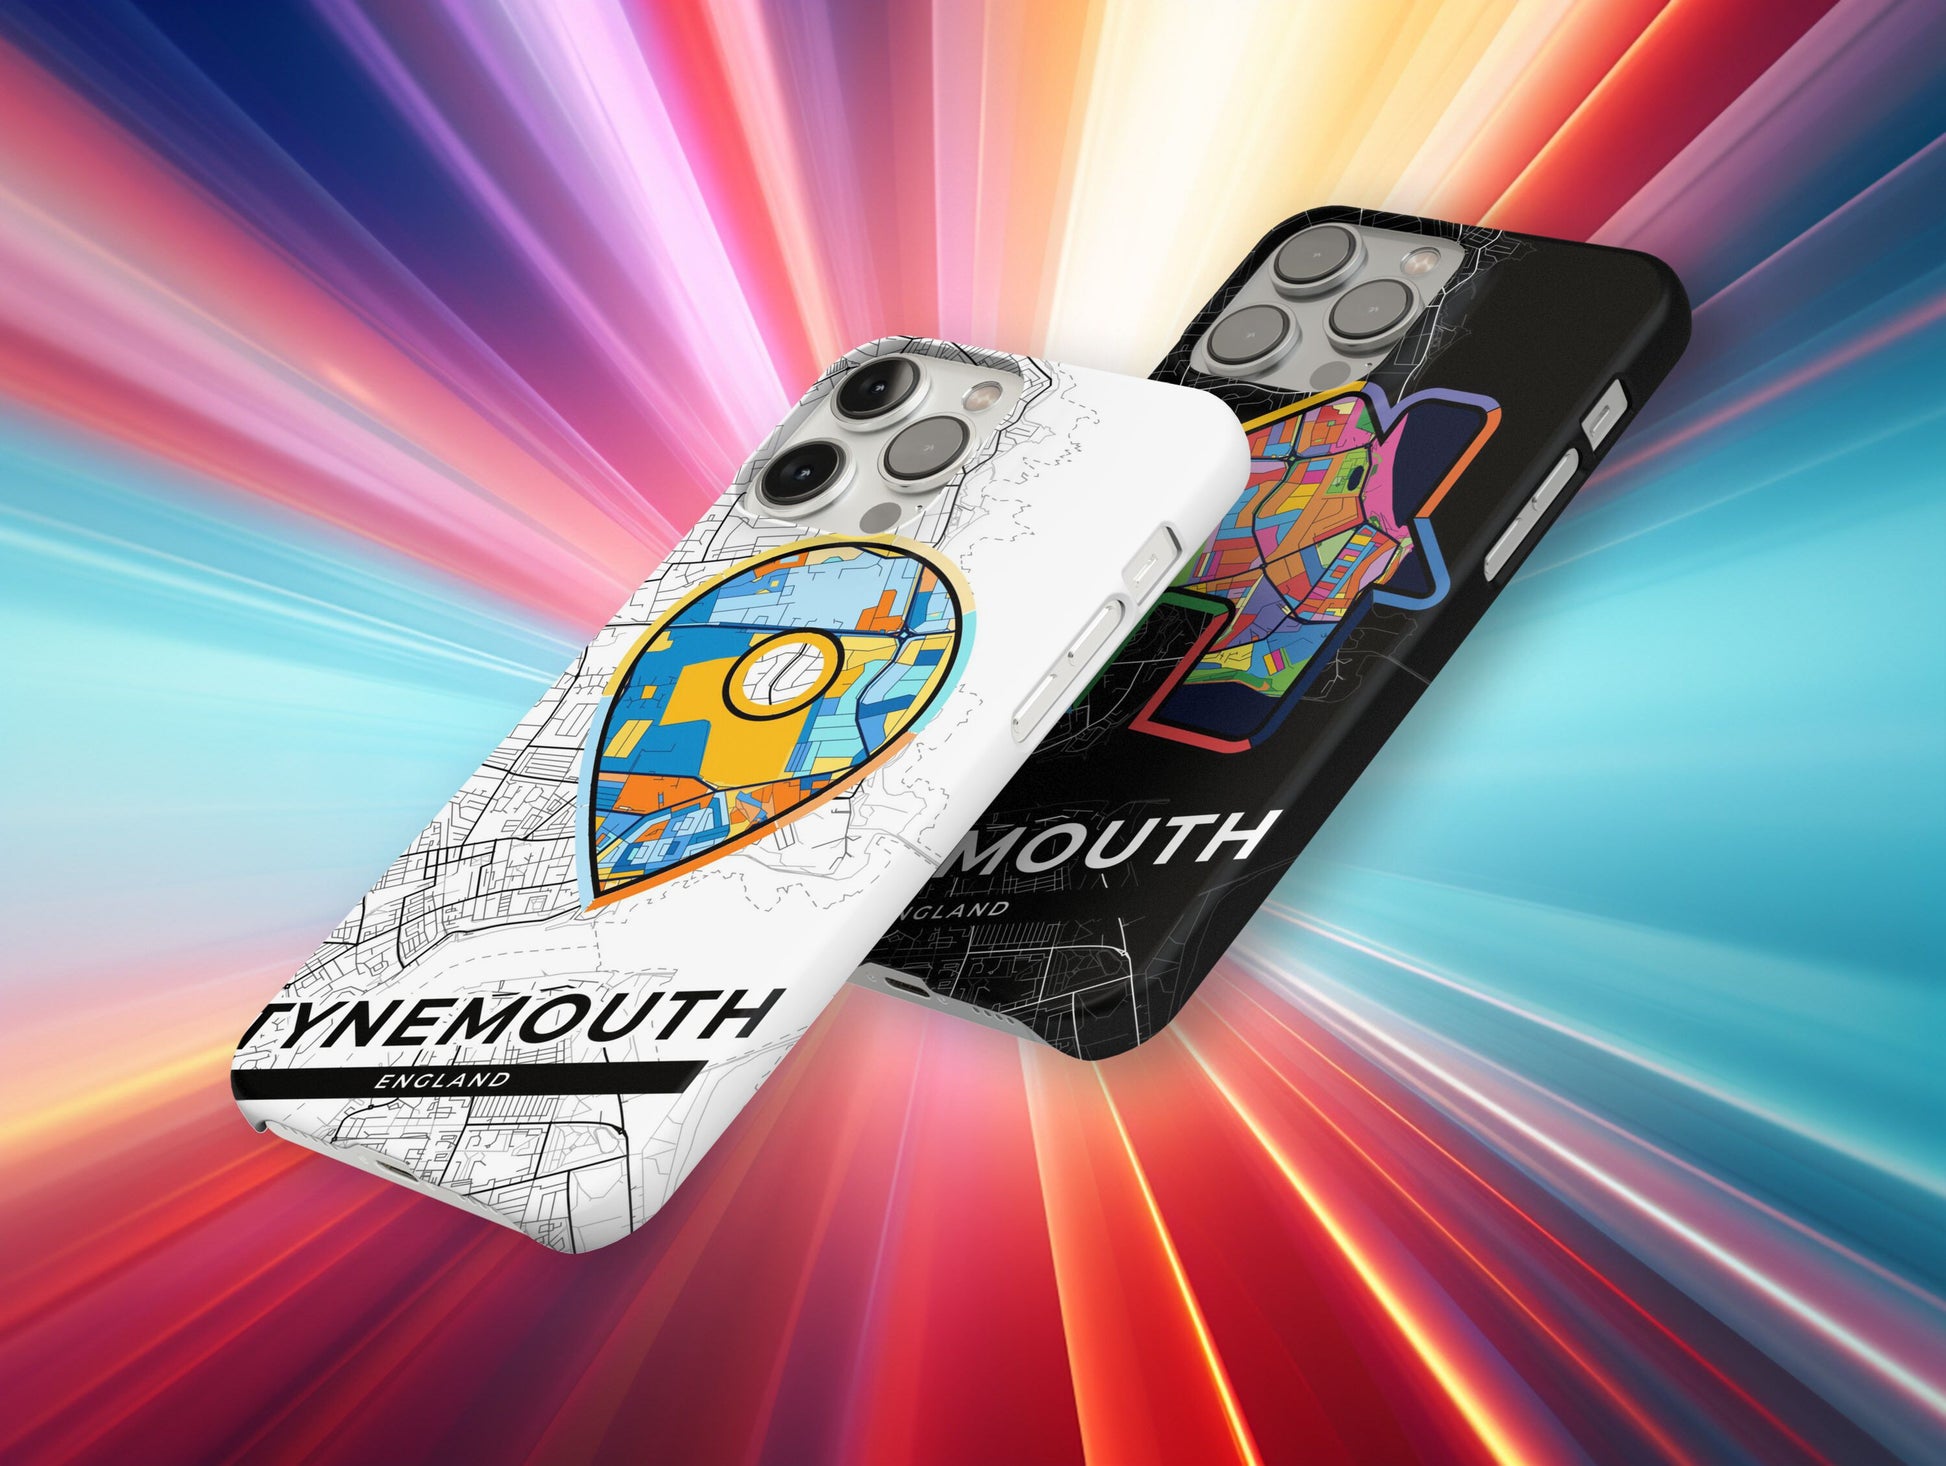 Tynemouth England slim phone case with colorful icon. Birthday, wedding or housewarming gift. Couple match cases.